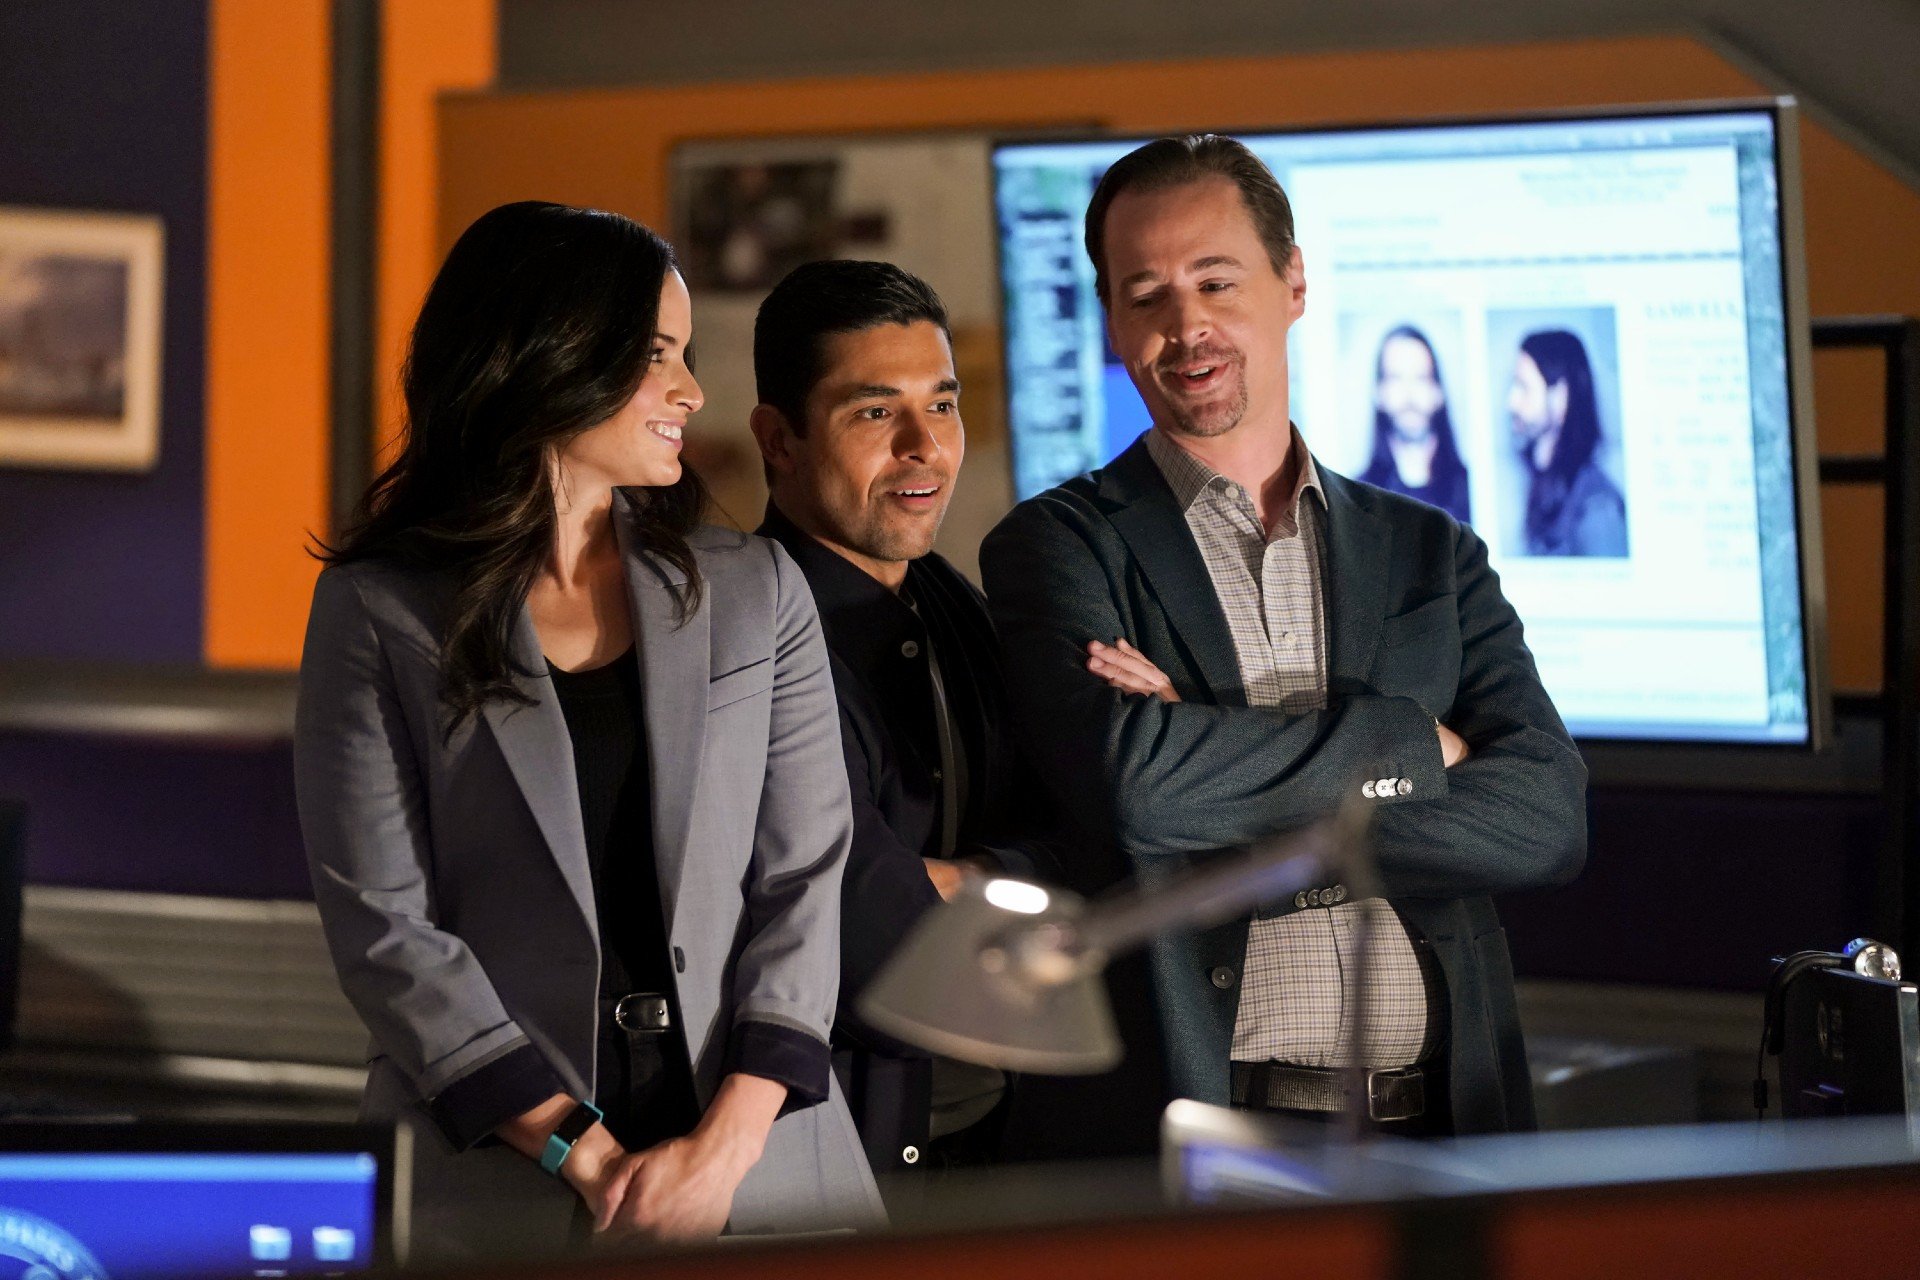 The NCIS team stands together in the office and smiles.